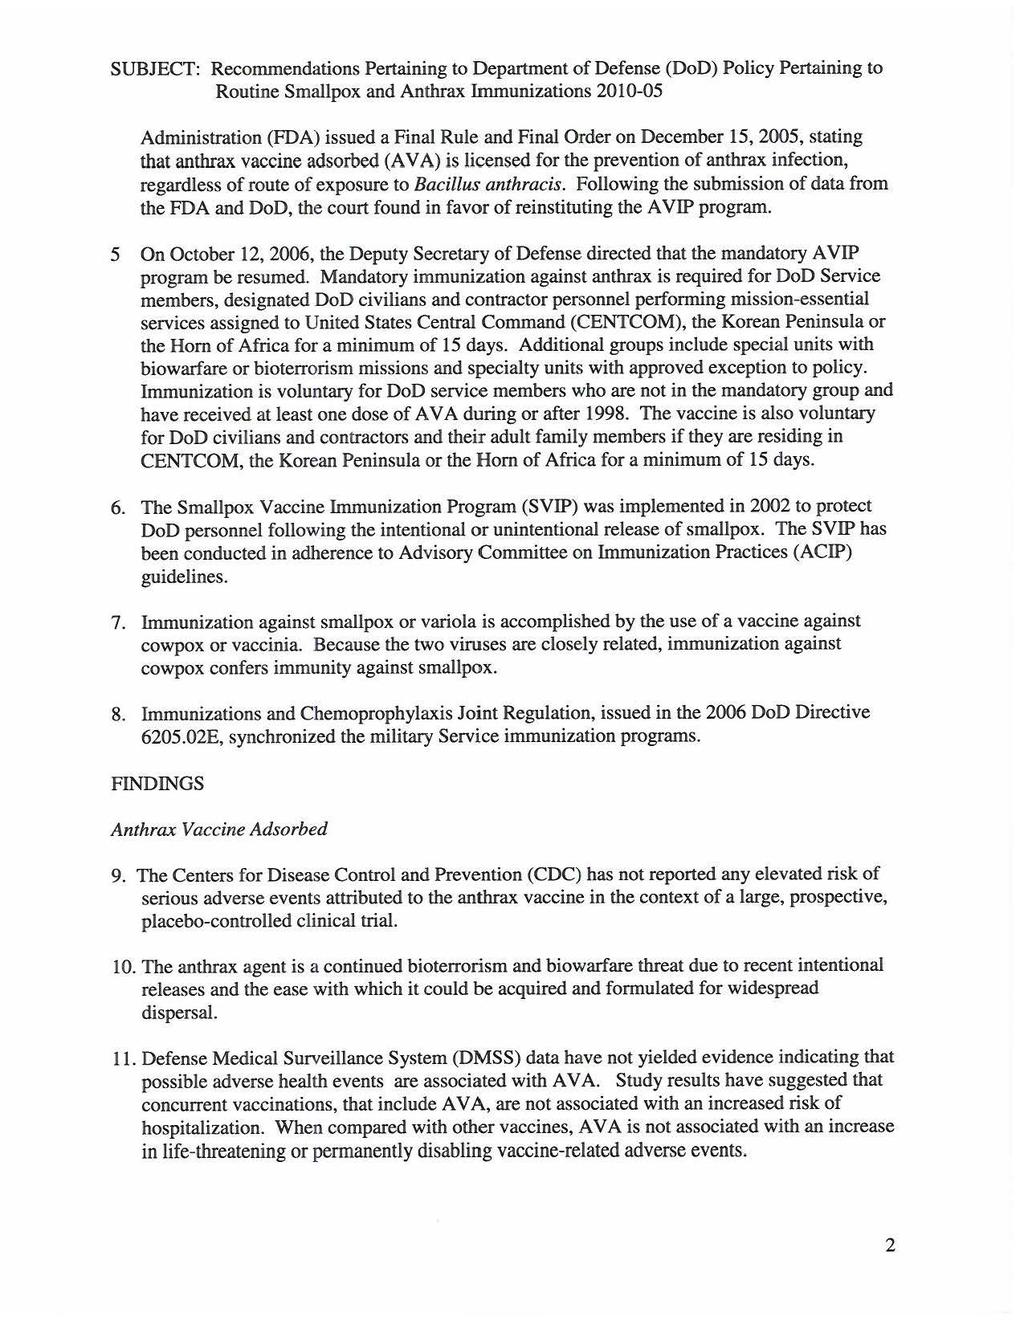 SUBJECT: Recommendations Pertaining to Department of Defense (DoD) Policy Pertaining to Administration (FDA) issued a Final Rule and Final Order on December 15, 2005, stating that anthrax vaccine